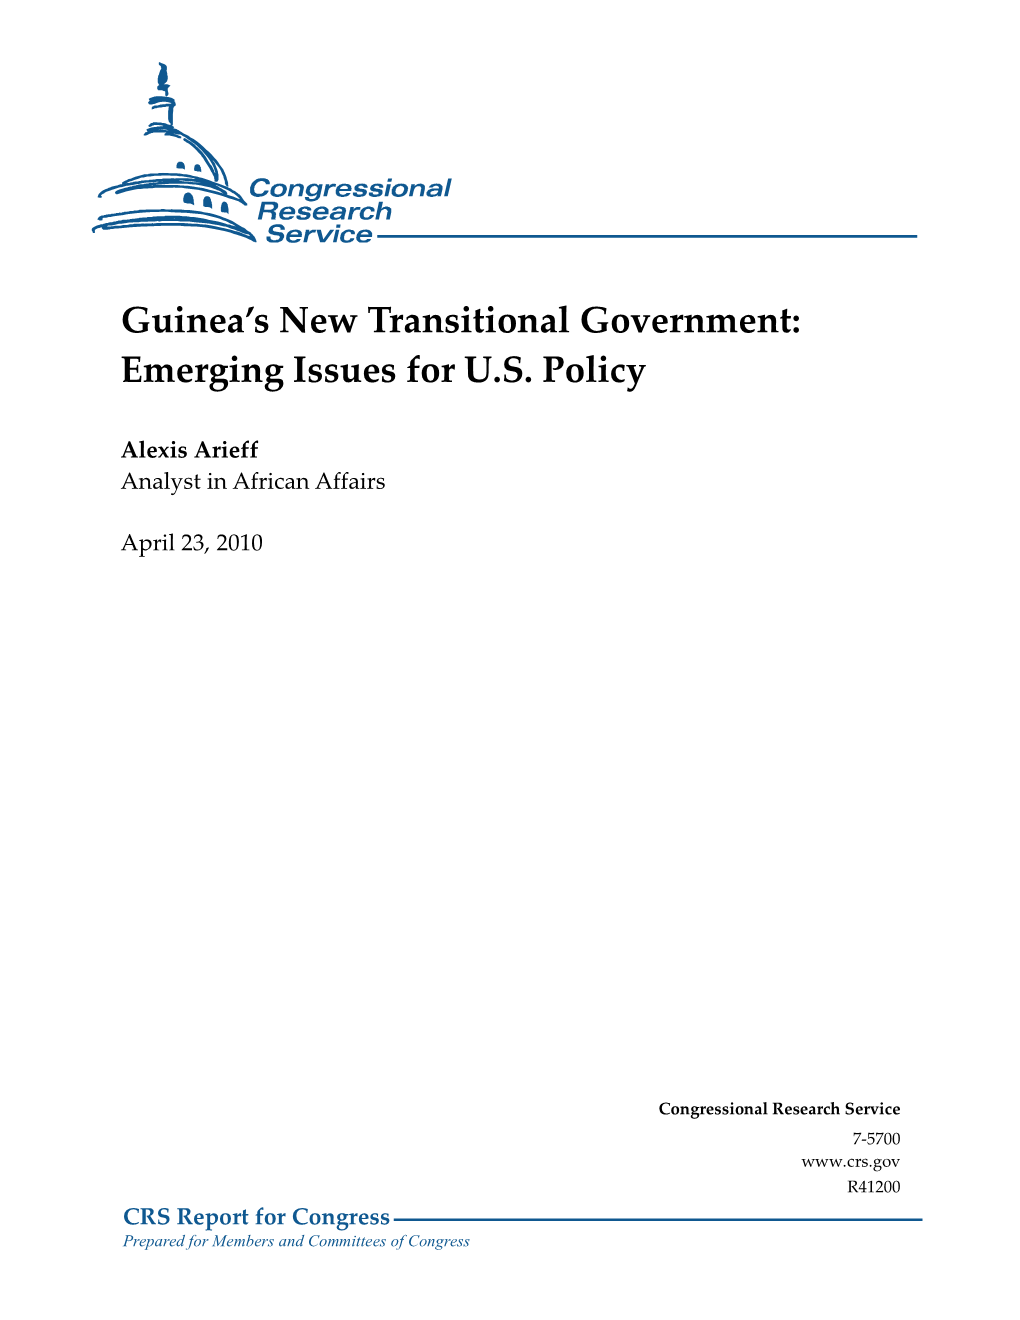 Guinea's New Transitional Government: Emerging Issues For